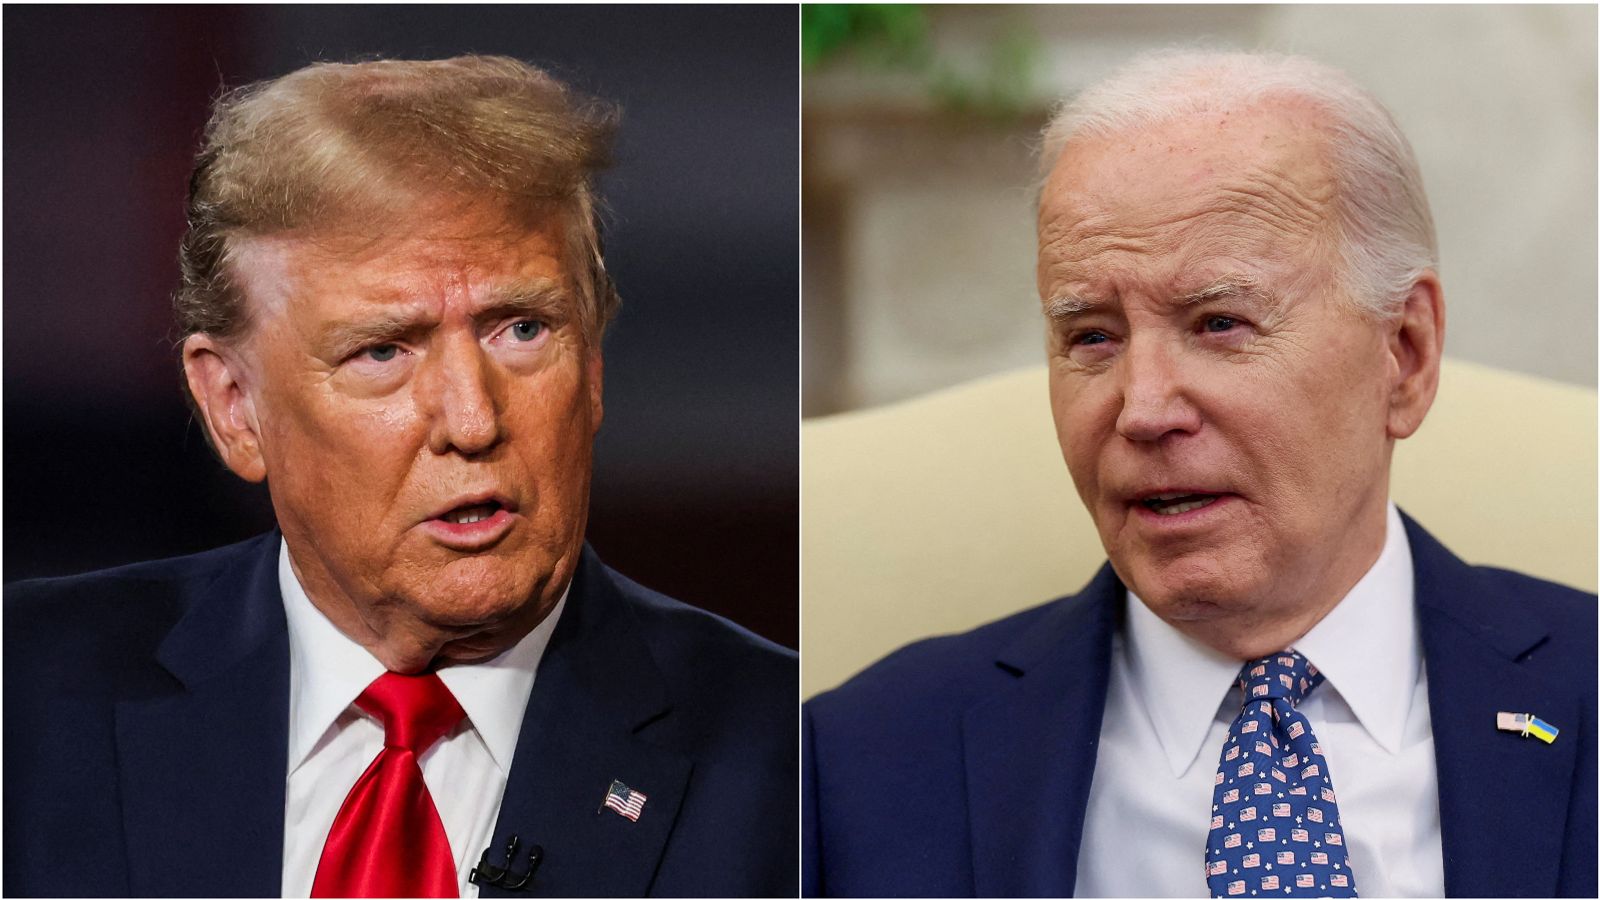 'Let's get ready to rumble': Biden and Trump agree to two TV debates